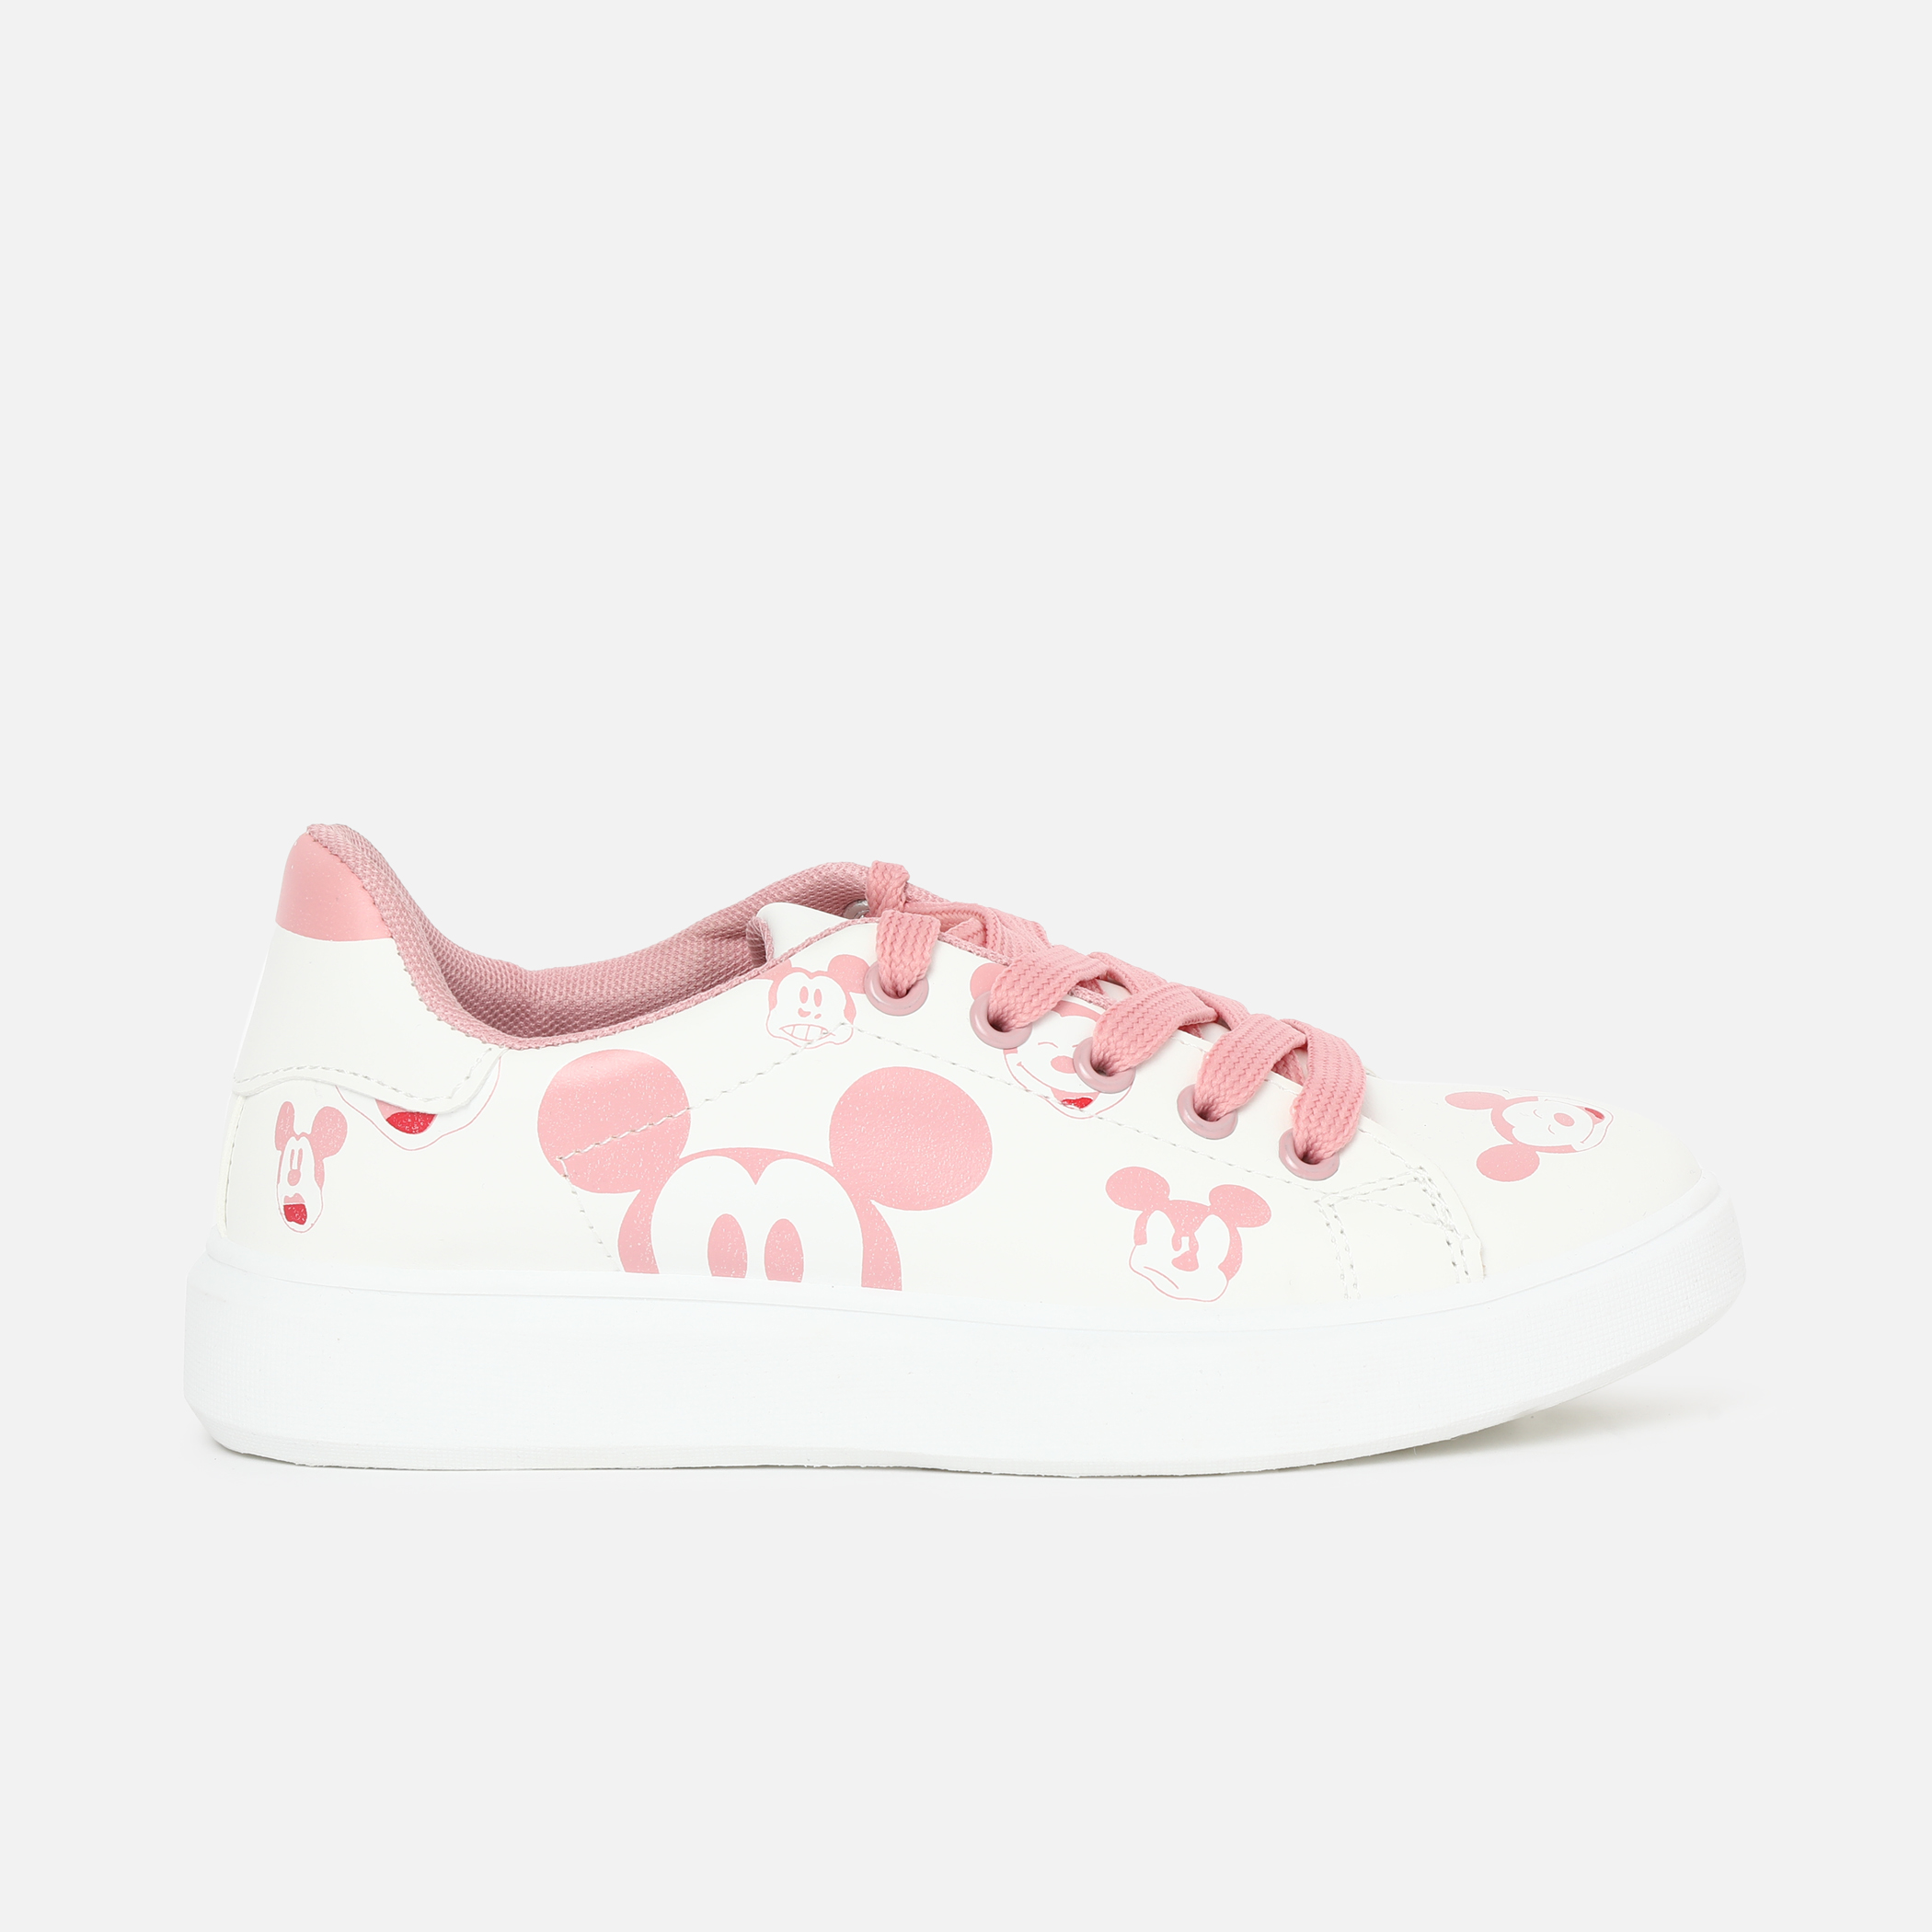 FAME FOREVER Girls Printed Lace-Up Character Sneakers